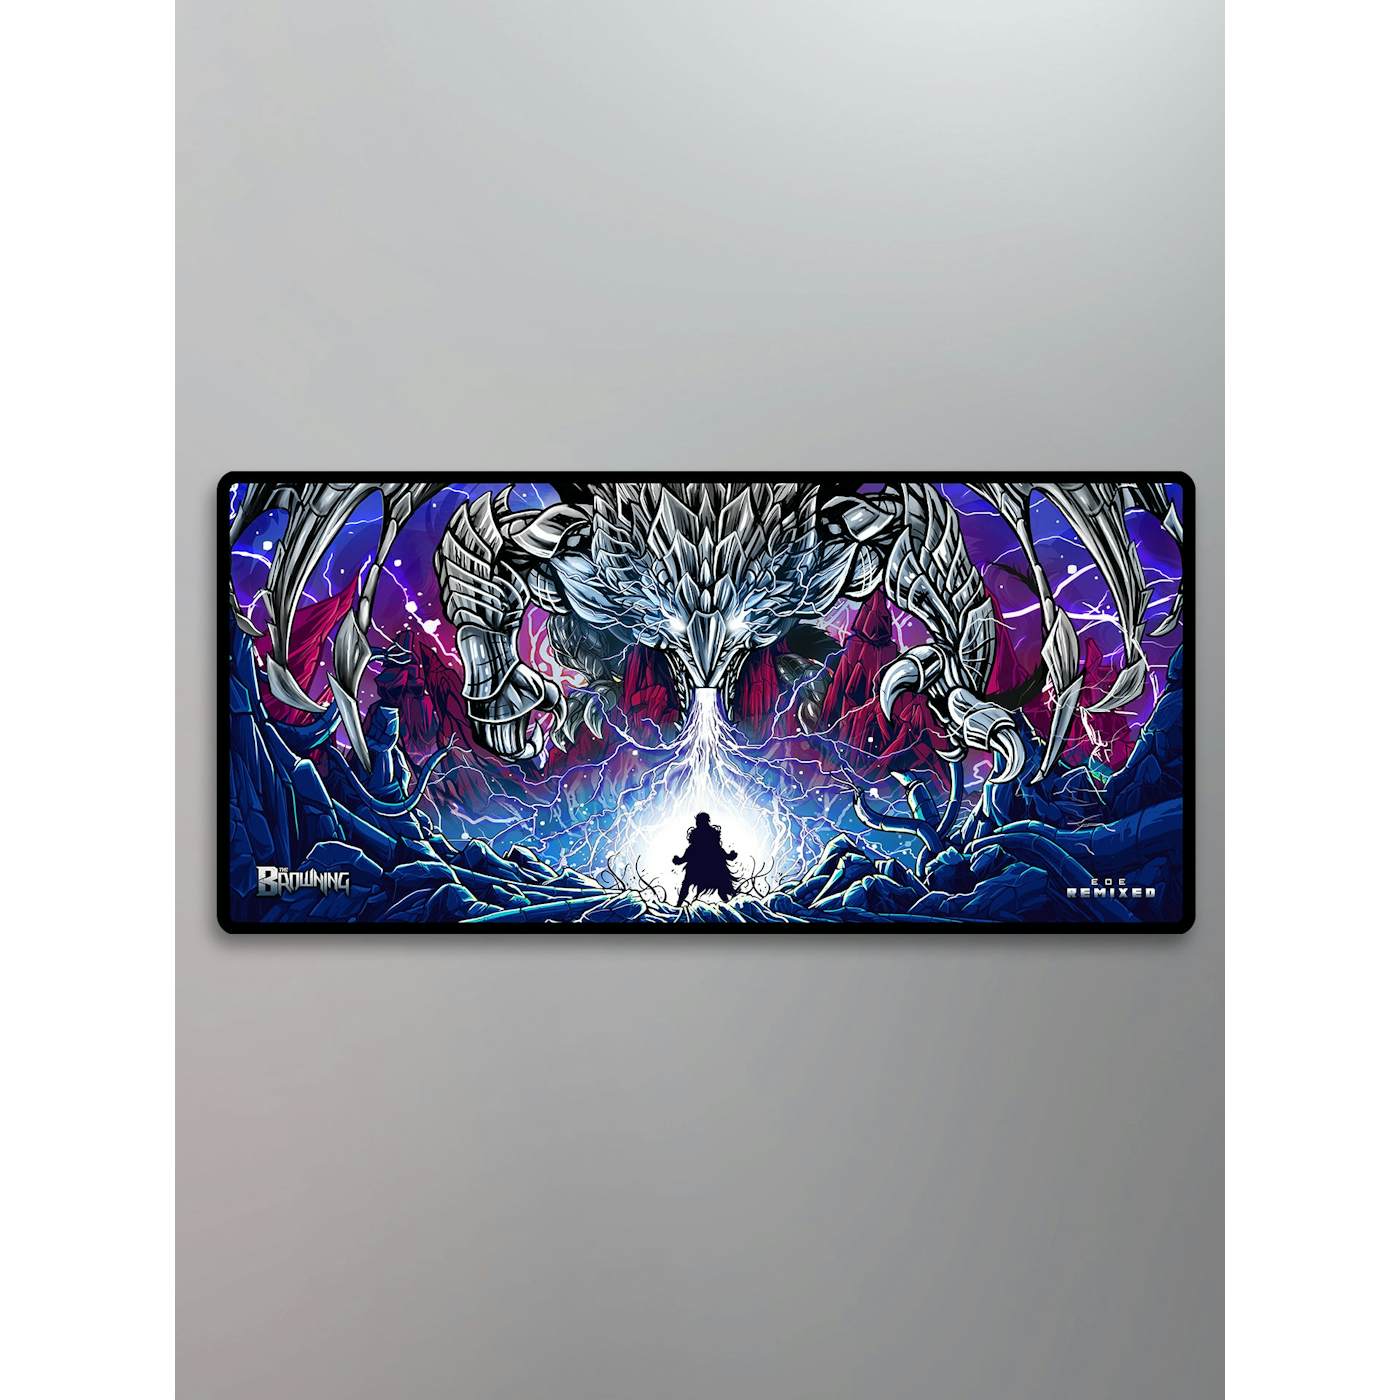 The Browning - End of Existence Remixed Gamer Mousepad